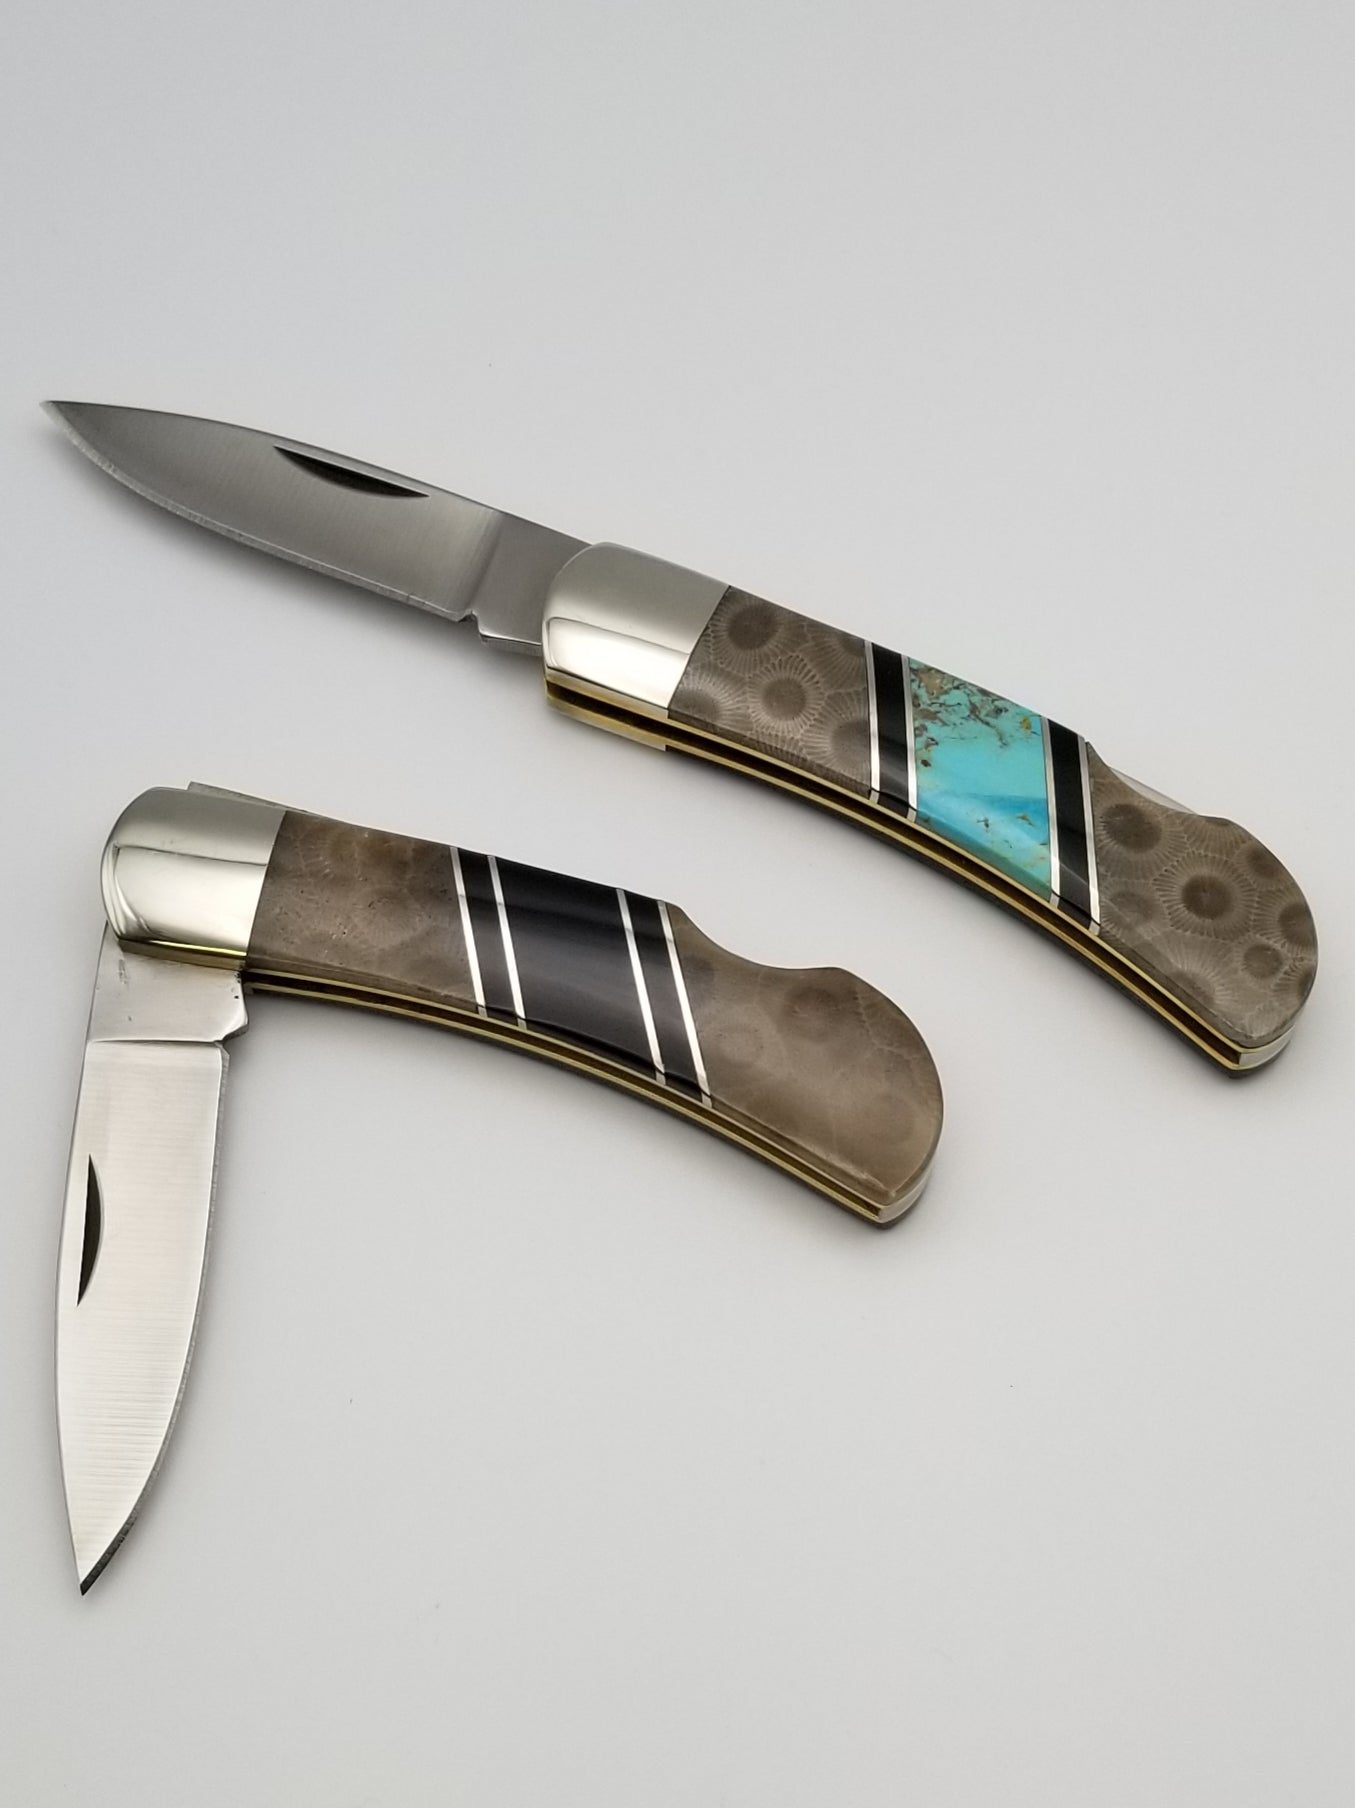 Top knife is fully opened and has a turquoise inlay between two Petoskey stone inlays. Bottom pocket knife is half opened and has a black amber inlay between the petoskey stone inlays.